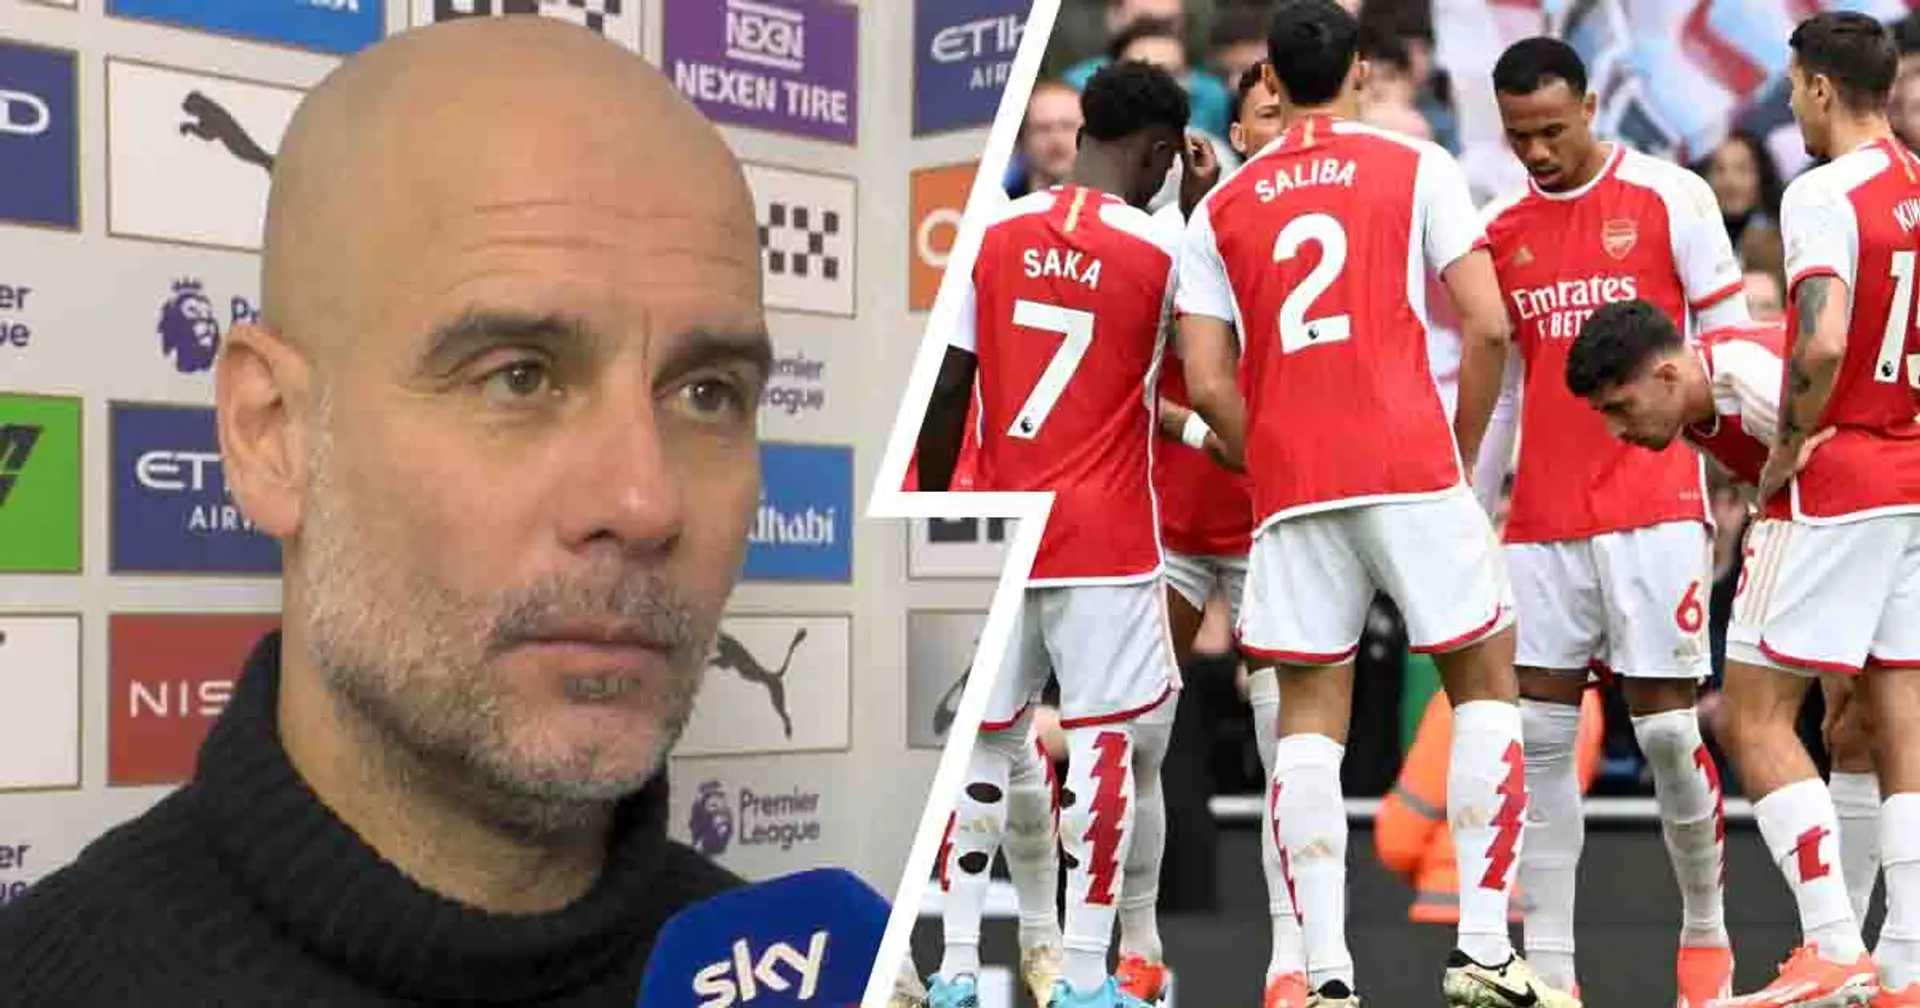 'They're really good with him': Guardiola singles one Arsenal player out for praise